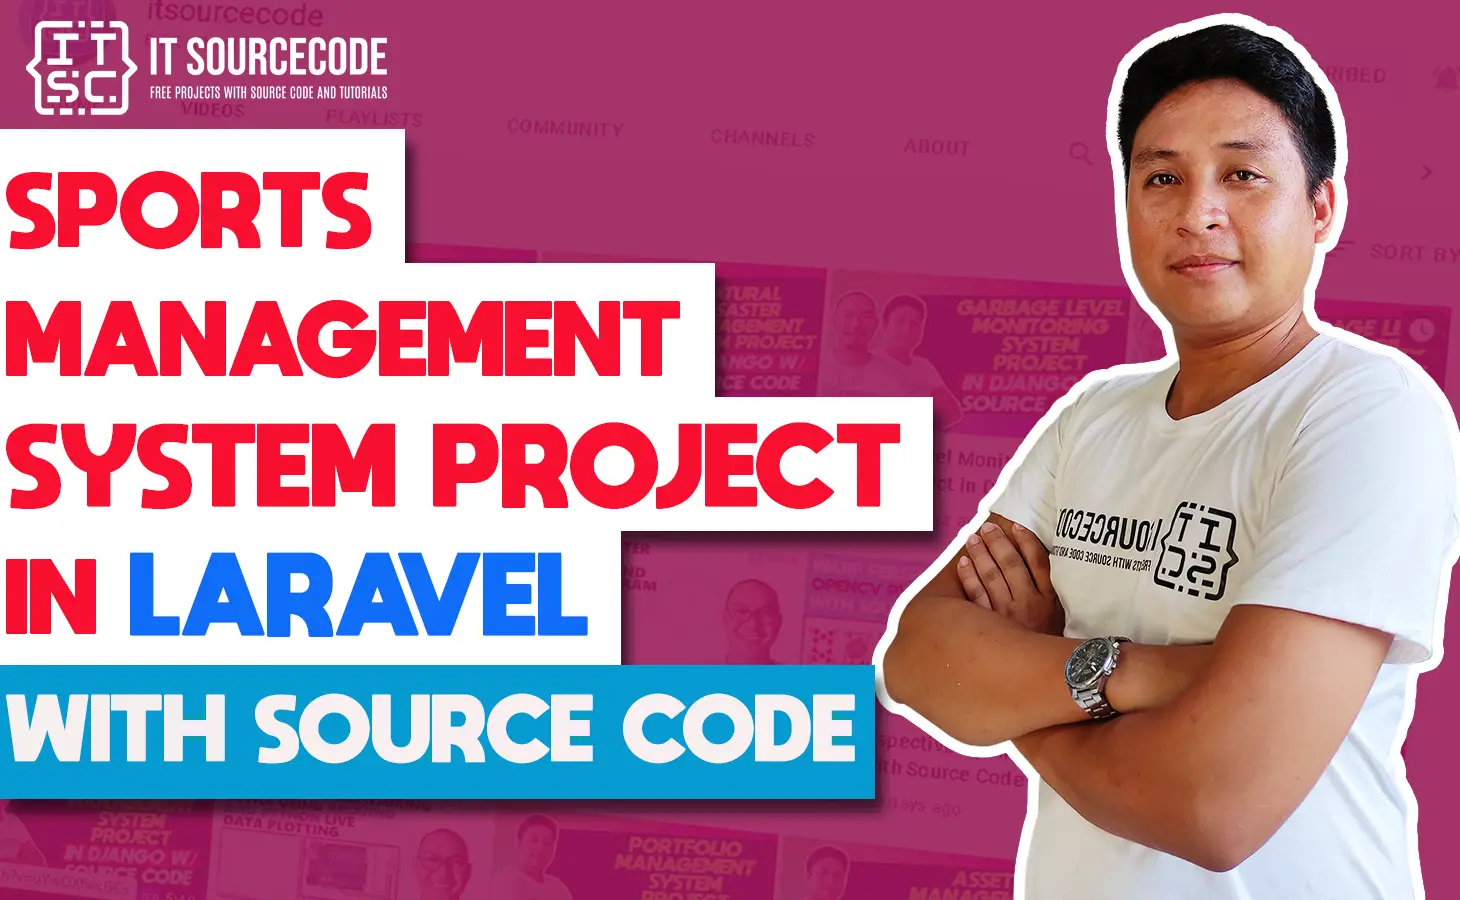 Sports Management System Project in Laravel with Source Code